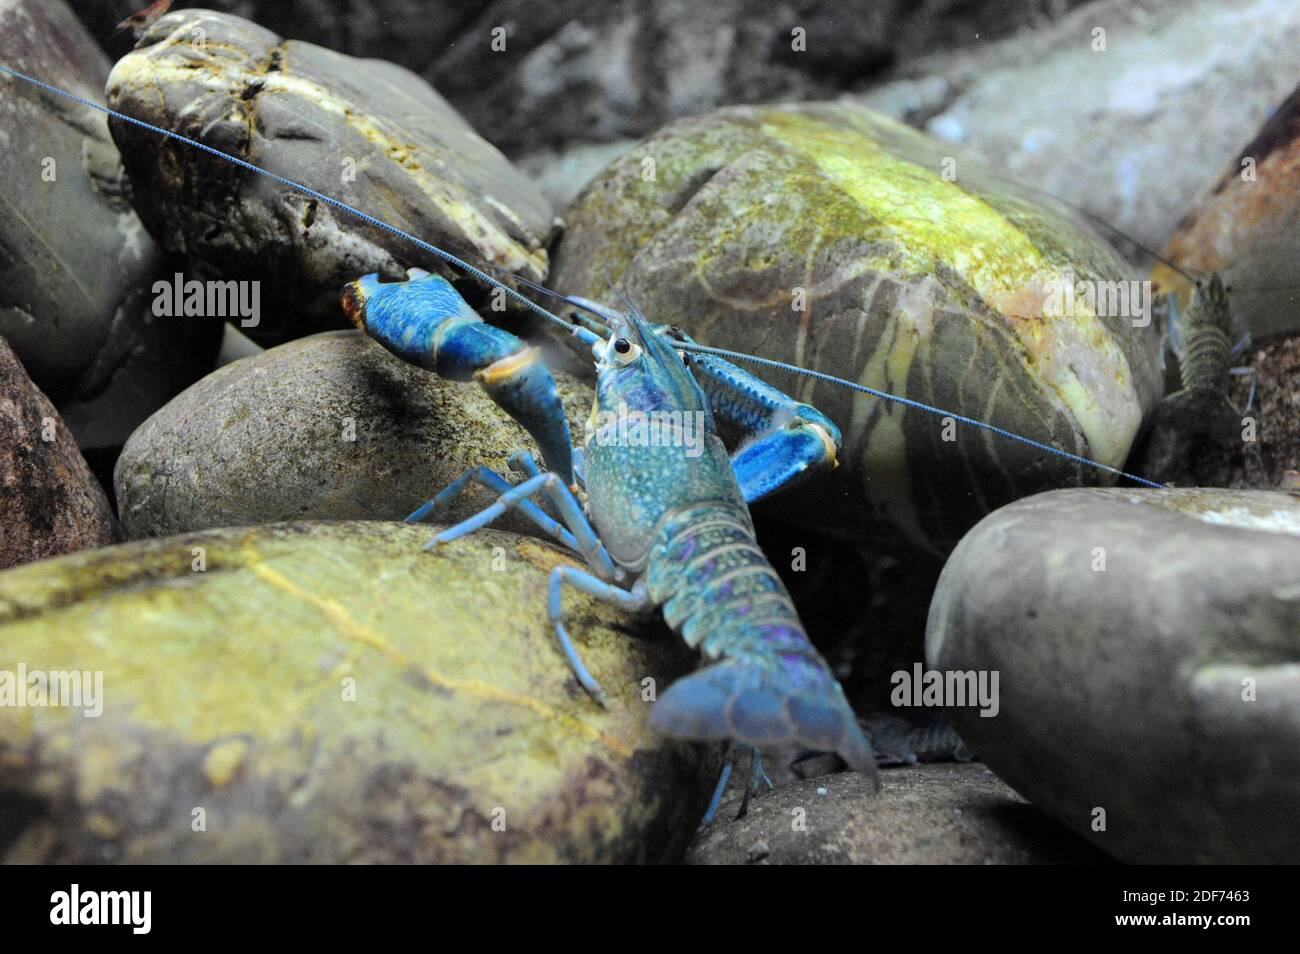 Australian red claw crayfish (Cherax quadricarinatus) is a freshwater crustacean native to Australia but naturalized in other temperate regions. Stock Photo